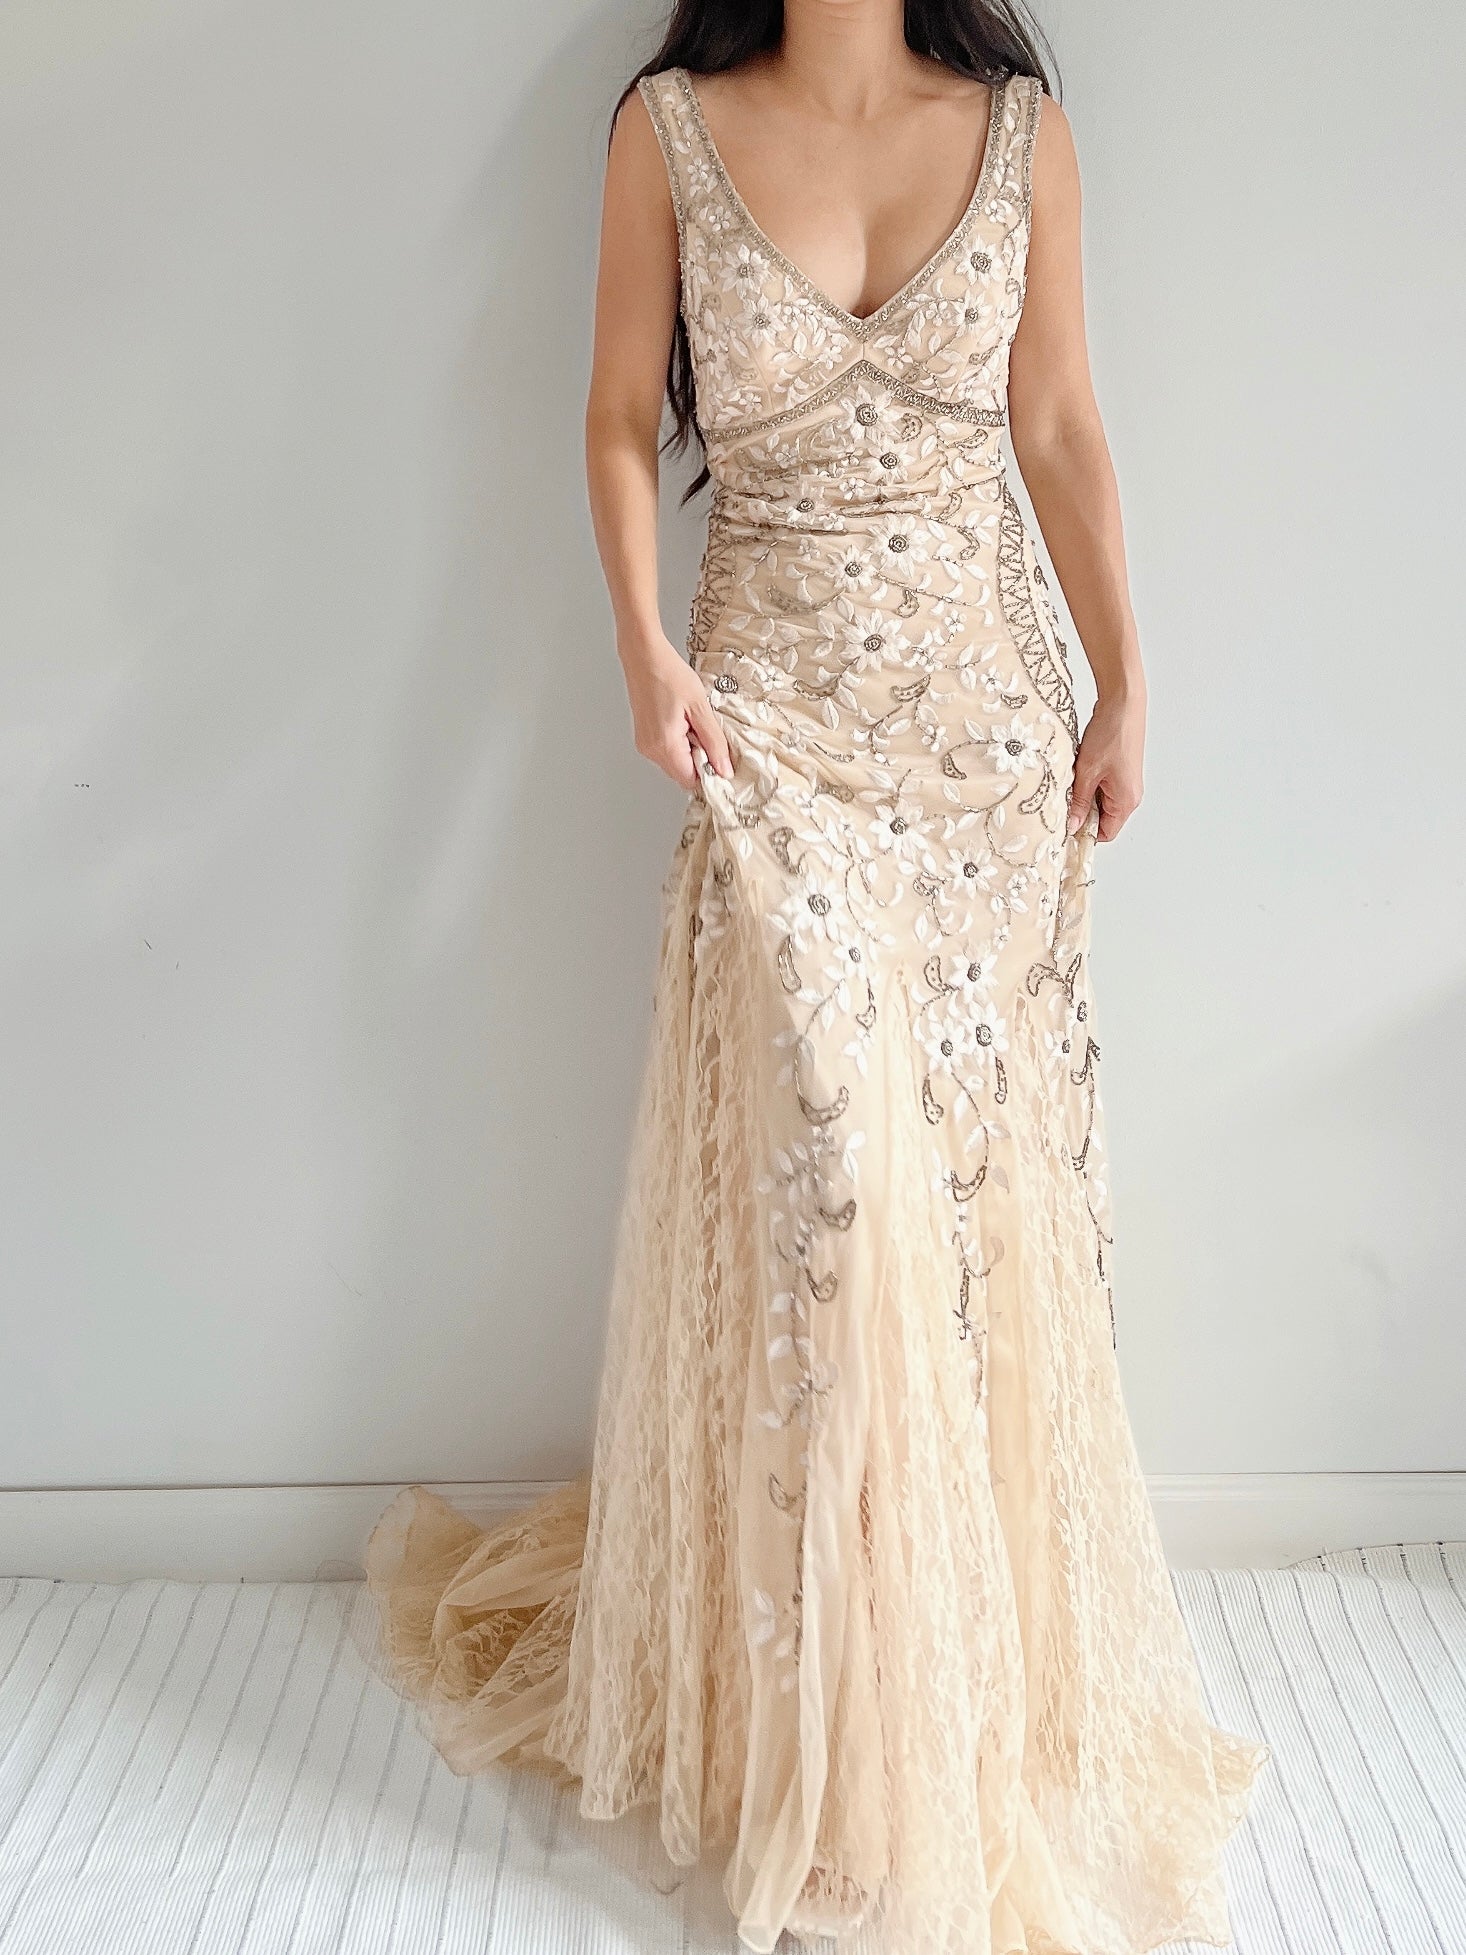 Vintage Embroidered Lace Gown - M